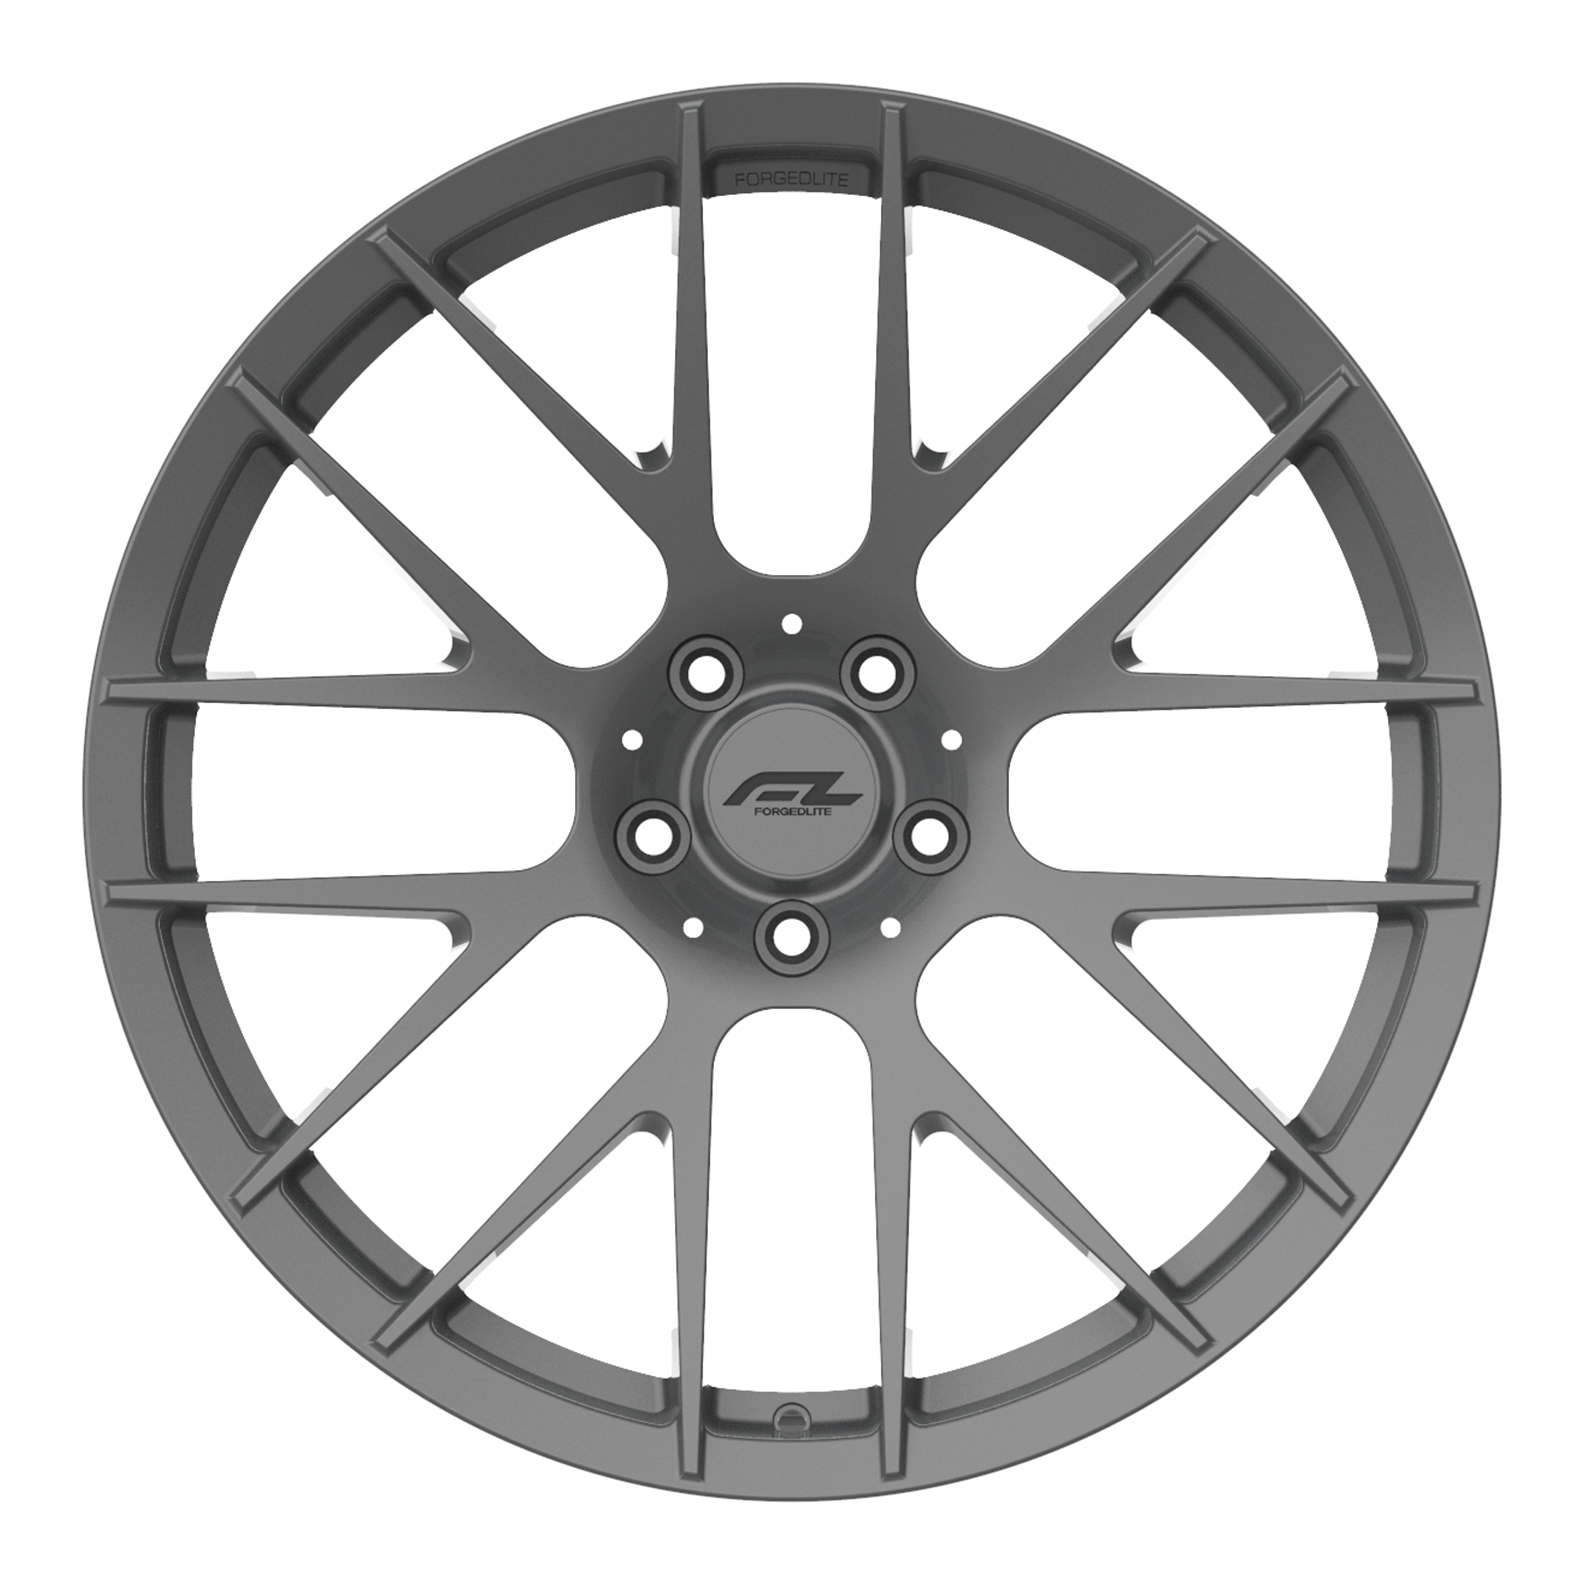 FORGEDLITE MC9 20X10 21X13 w/ MICHELIN PILOT SPORT 4S OR CUP 2R TIRES PACKAGE - Wheel Designers